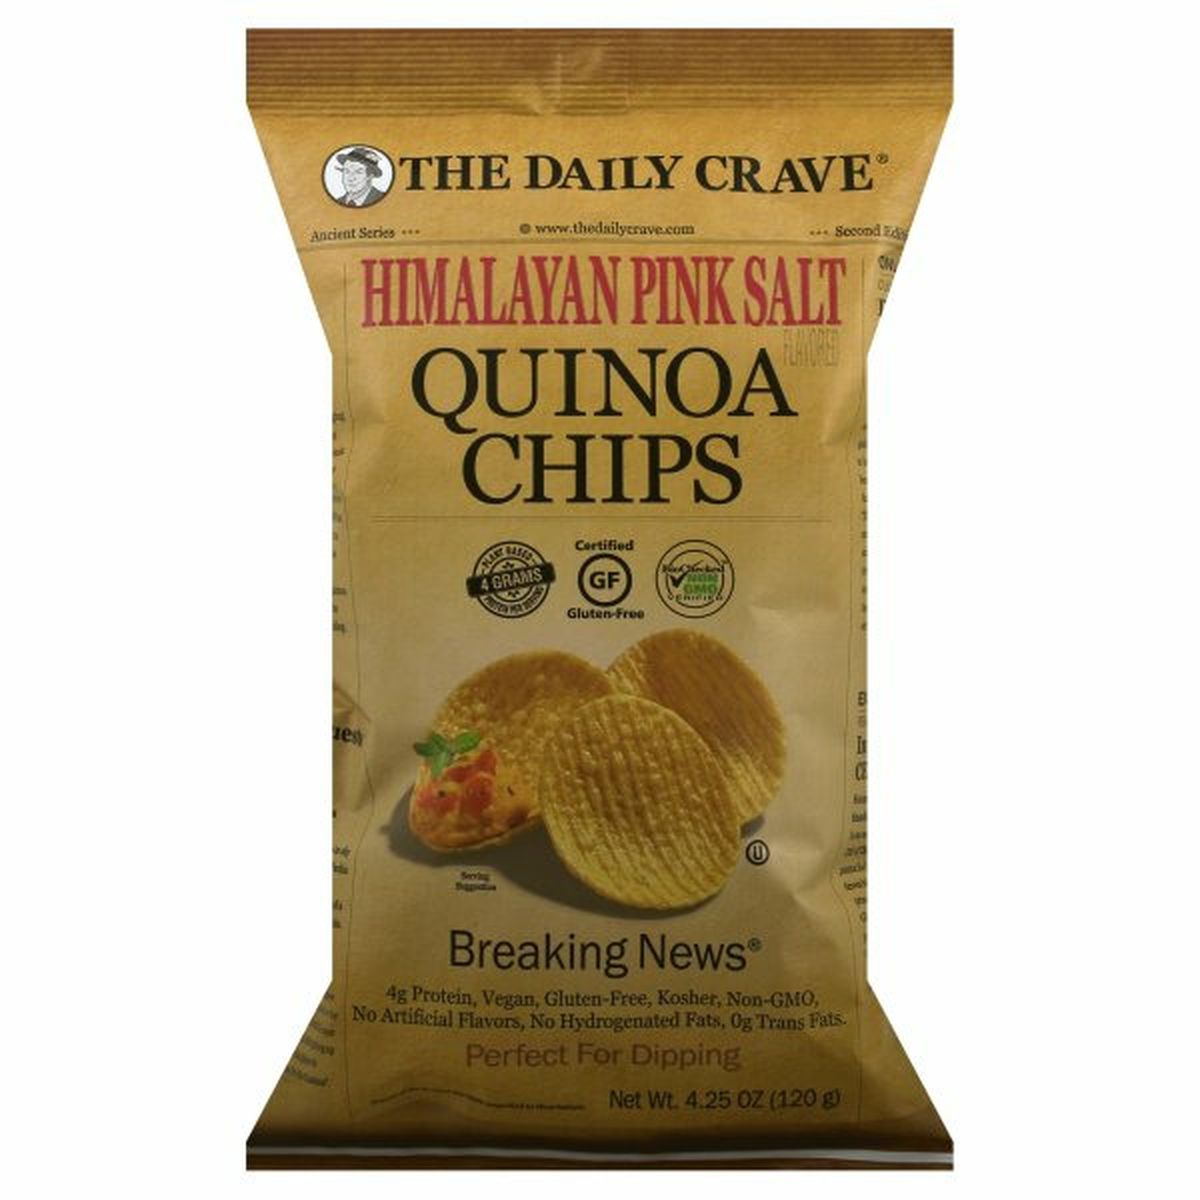 Calories in The Daily Crave Quinoa Chips, Himalayan Pink Salt